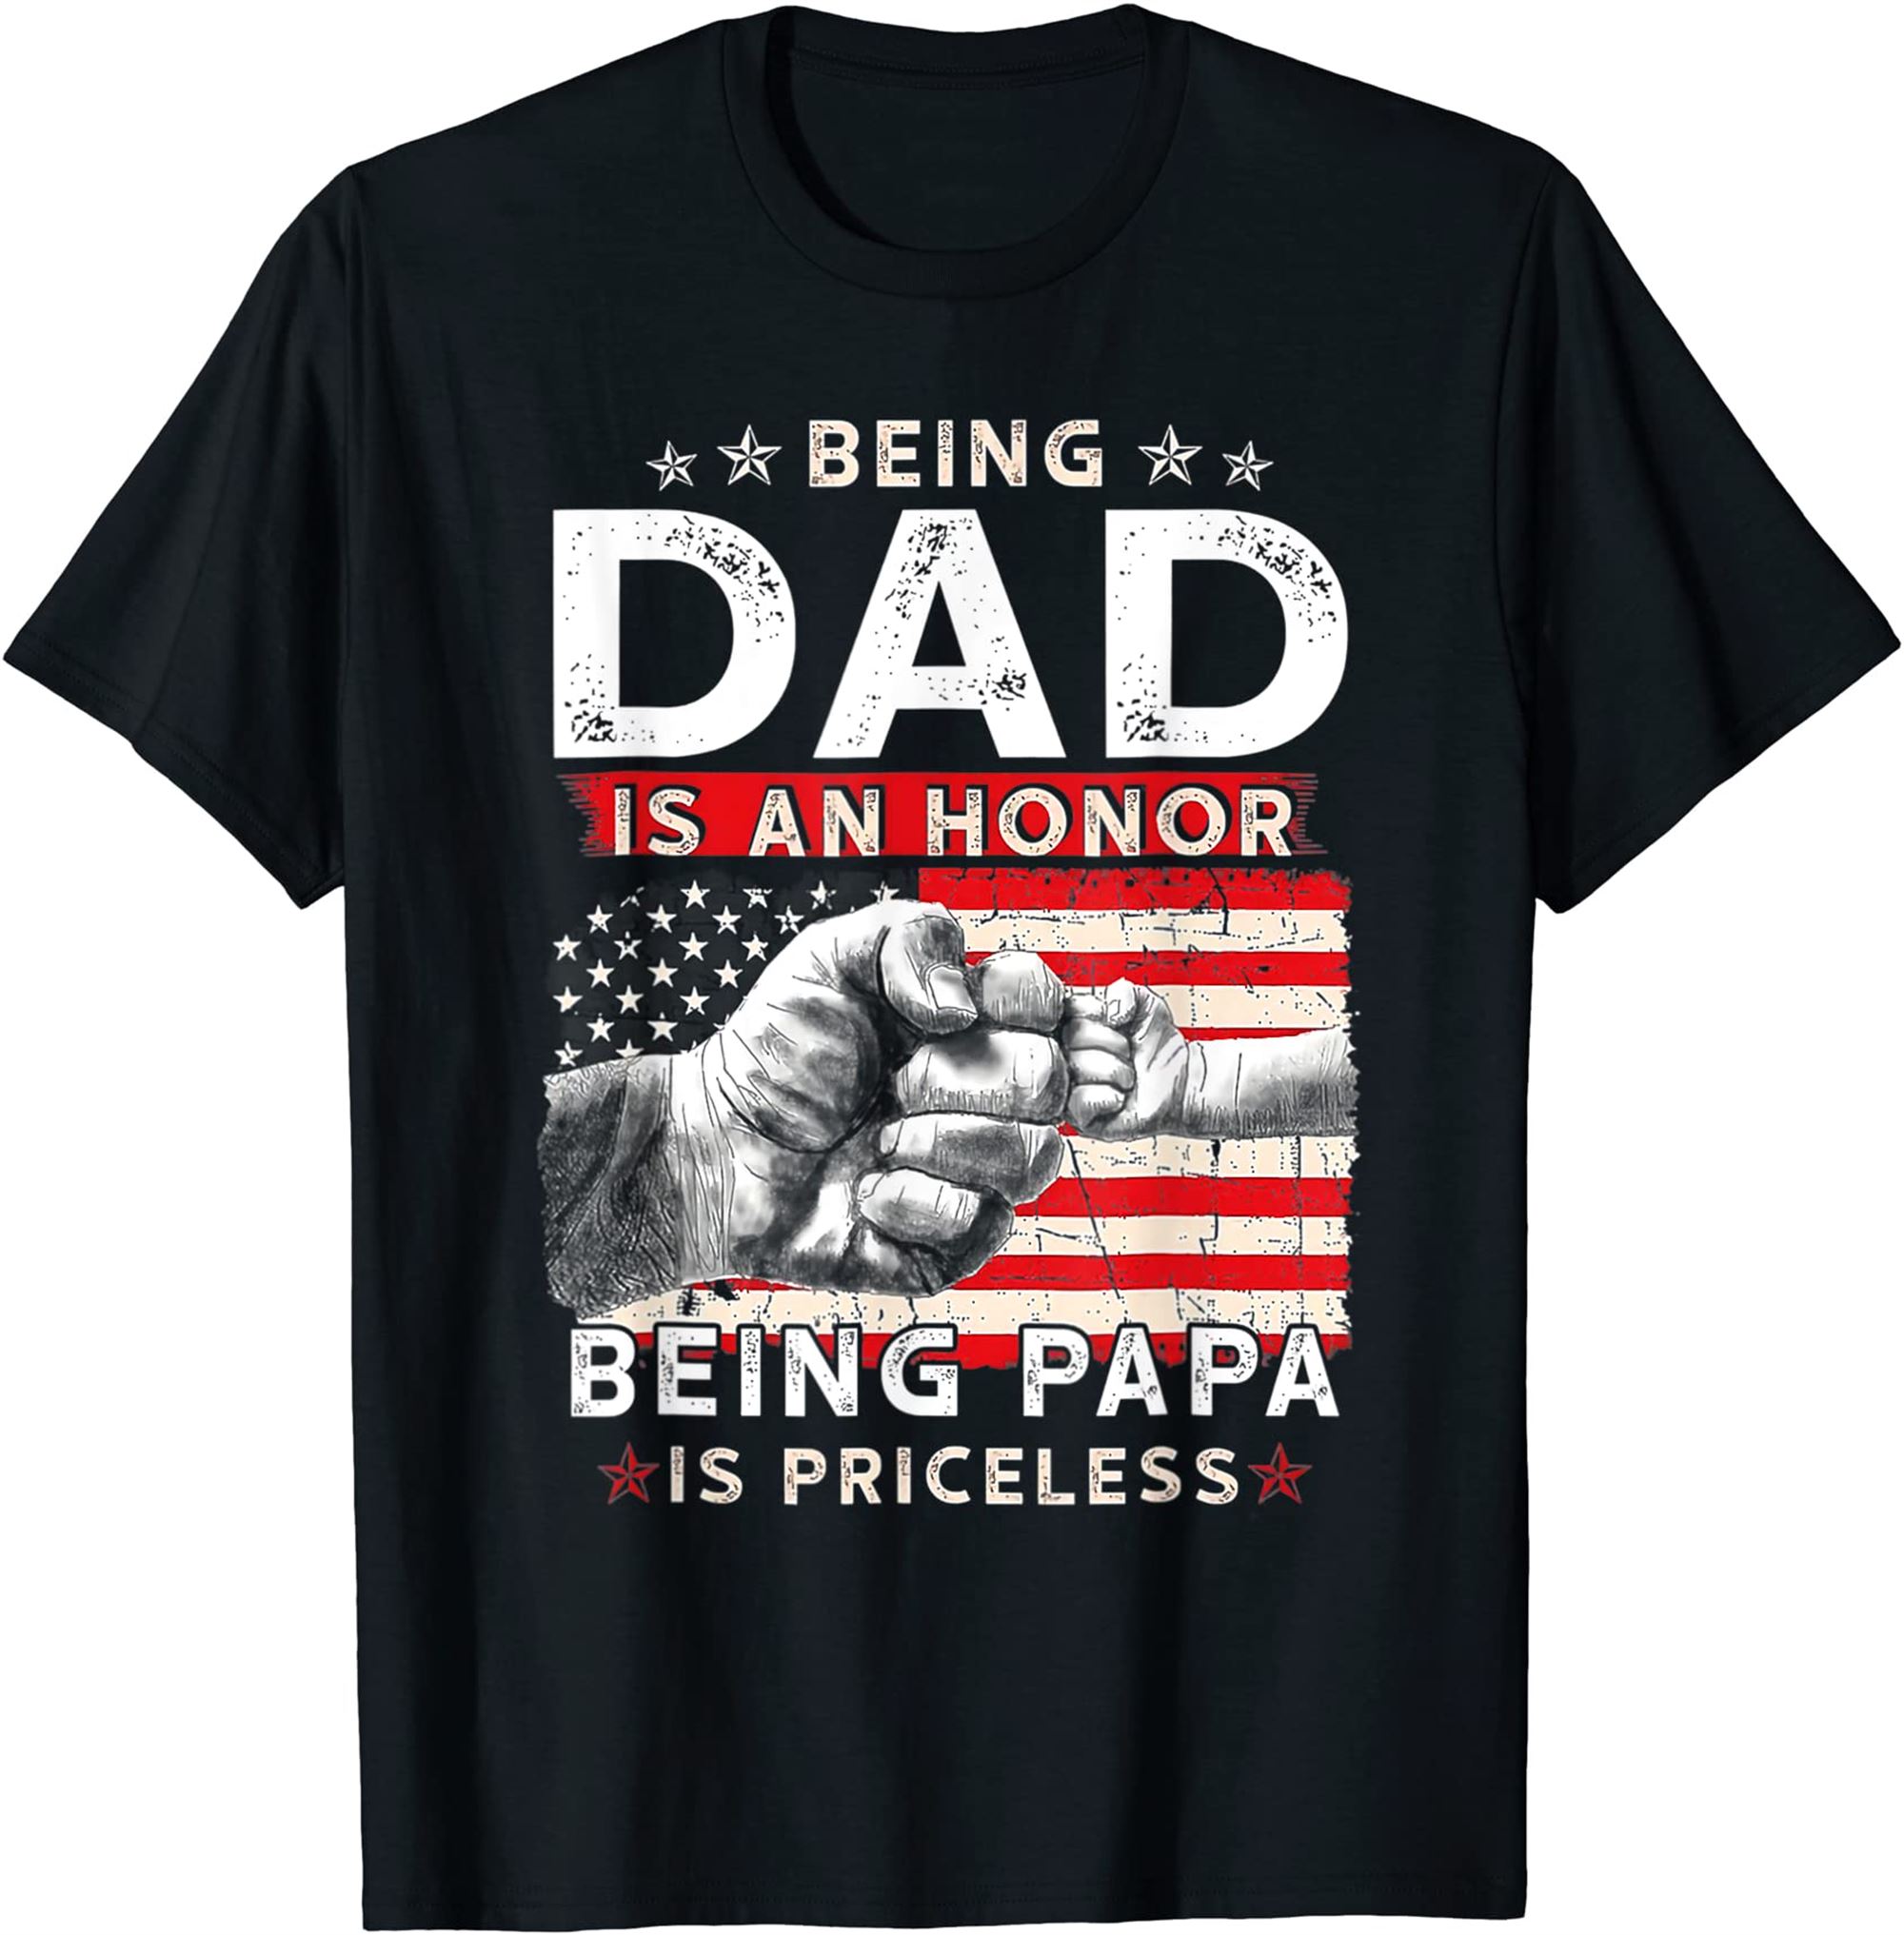 Mens Fathers Day For Dad An Honor Being Papa Is Priceless T-shirt Plus Size Up To 5xl